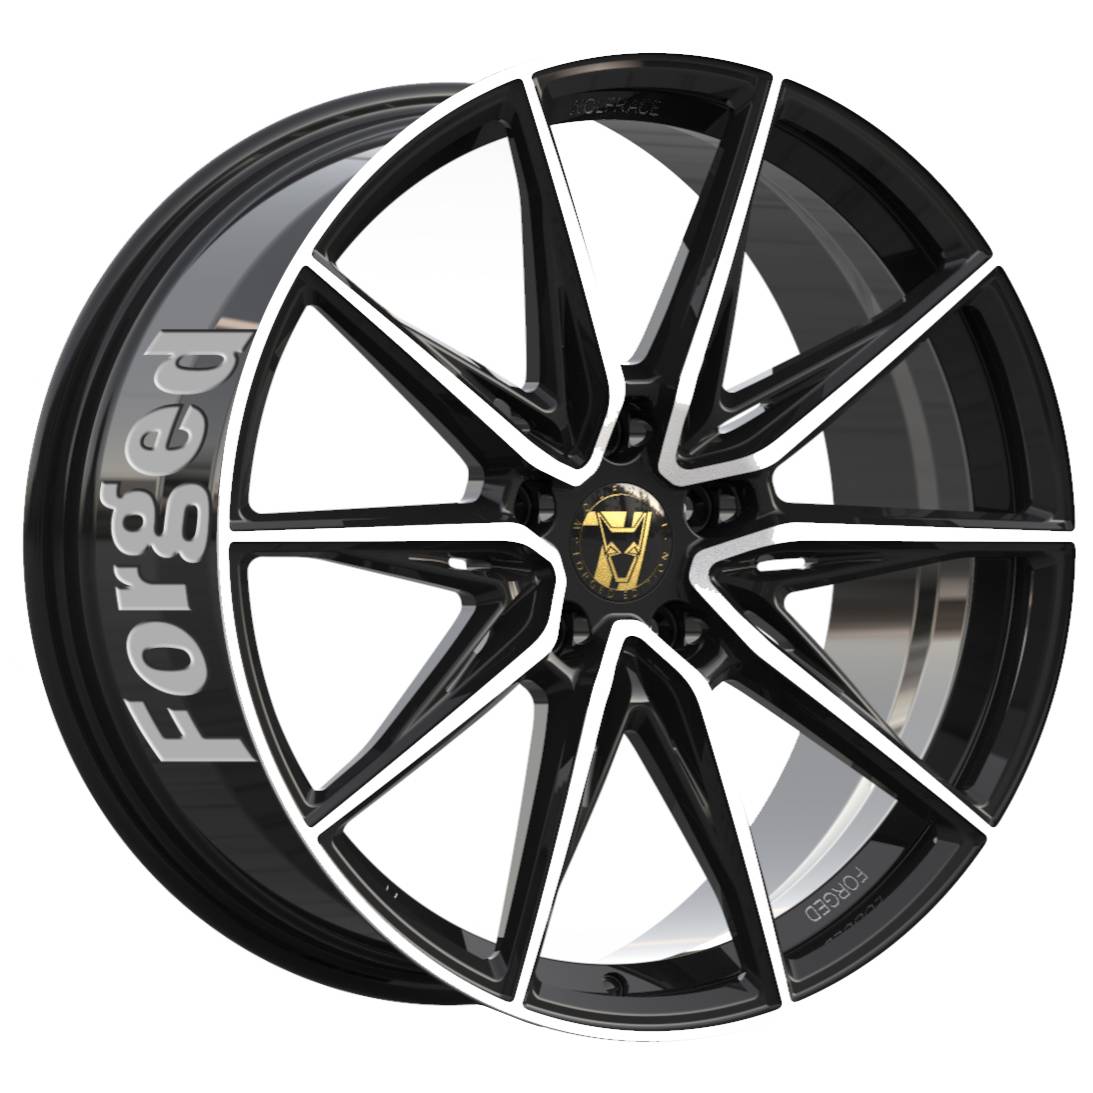 Demon Wheels 71 Forged Edition Urban Racer Forged [9.5x24] -5x130- ET 30